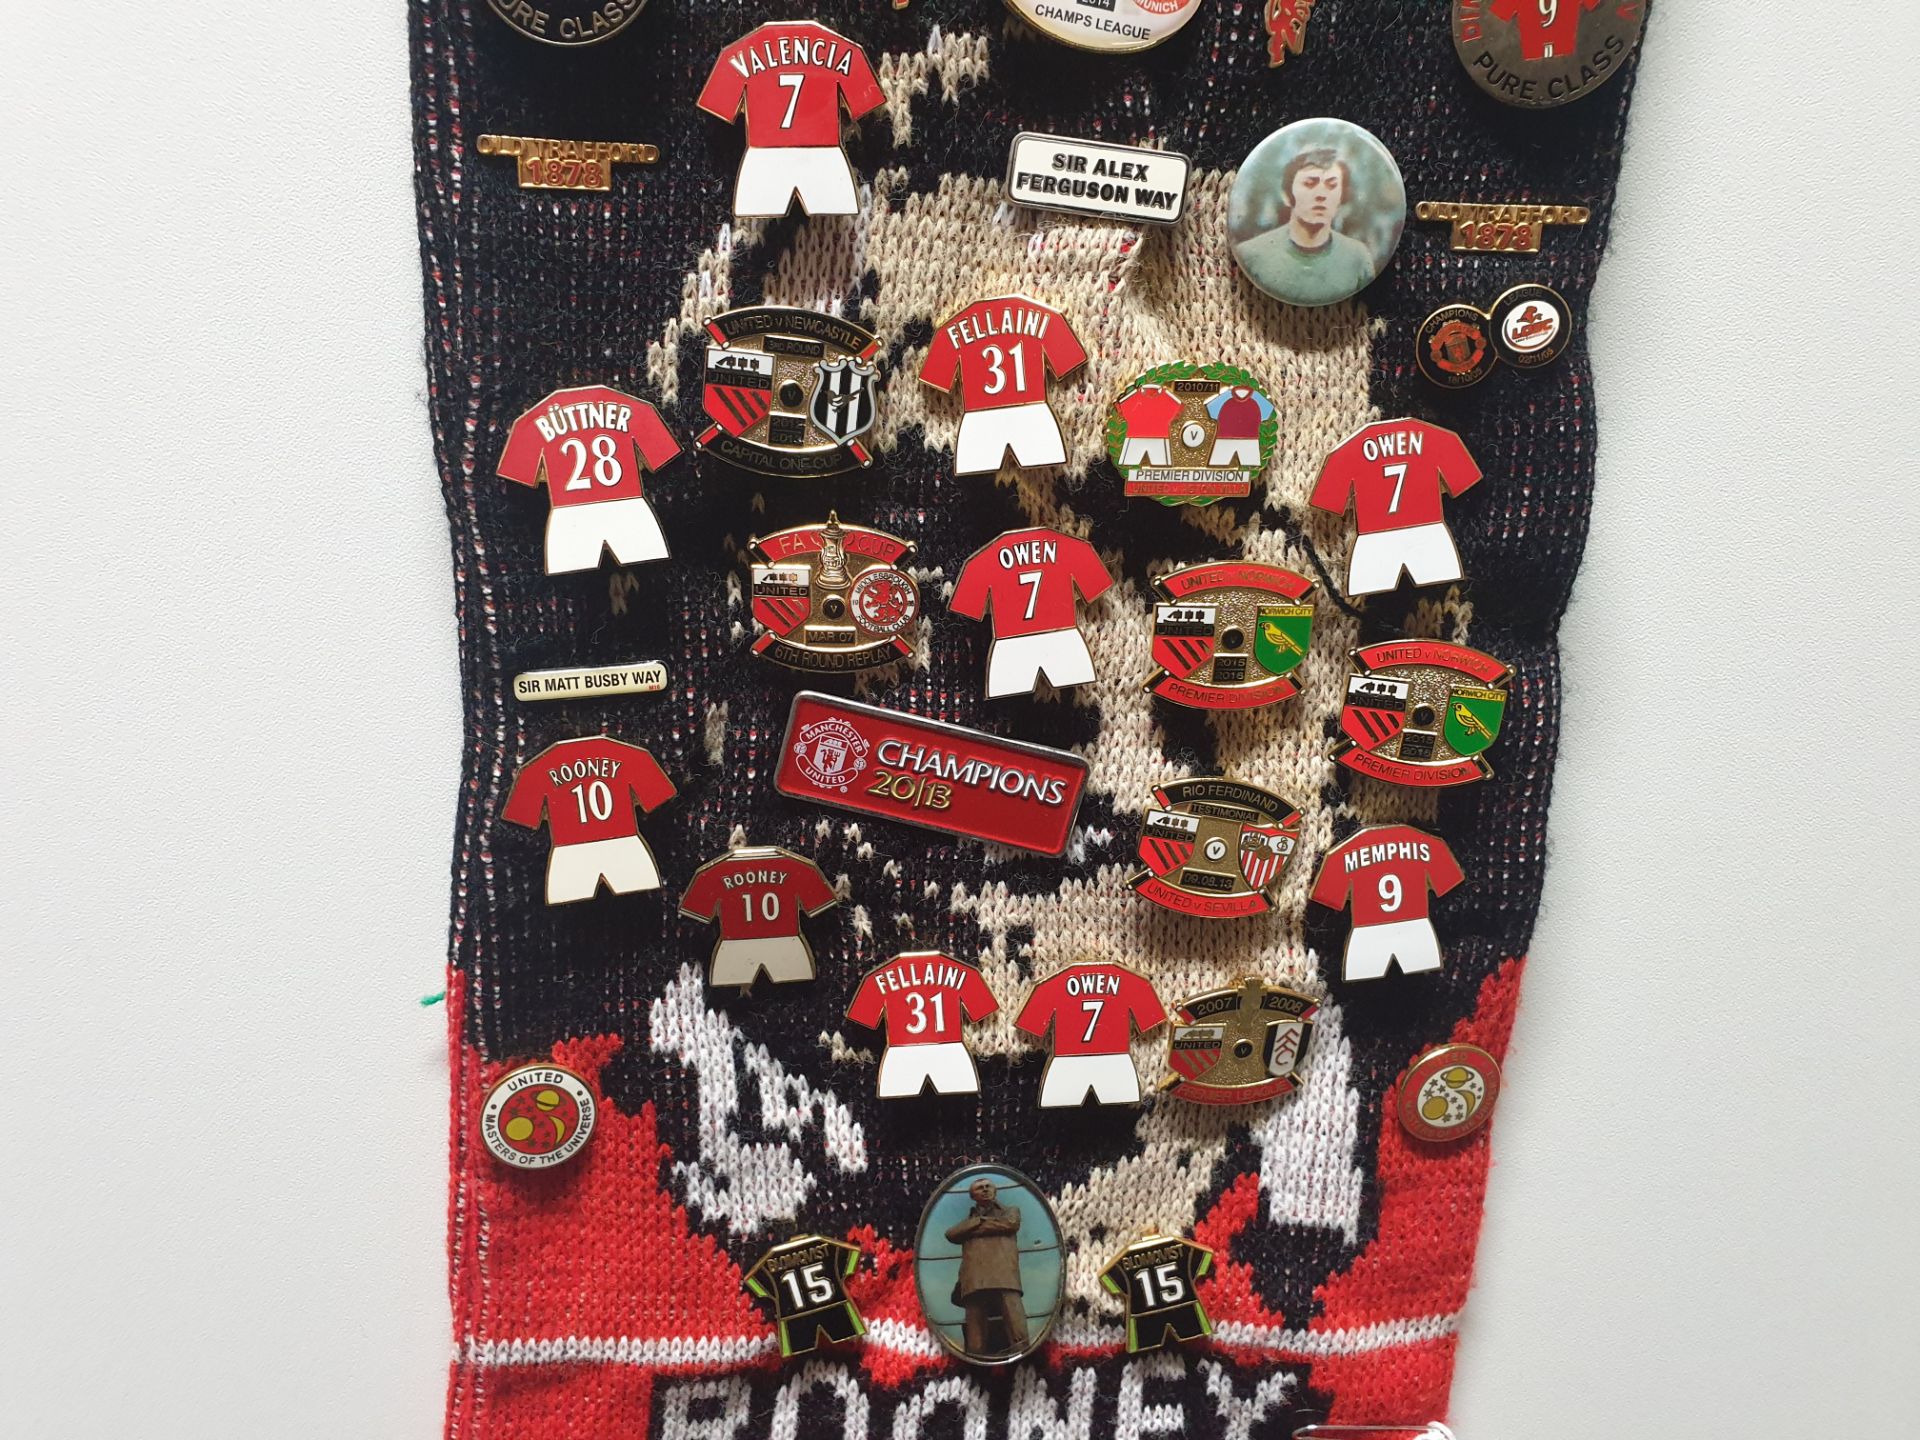 MANCHESTER UNITED SCARF CONTAINING APPROX 170 X PIN BADGES IE CHAMPIONS 2013, SIR ALEX FERGUSON WAY, - Image 8 of 8